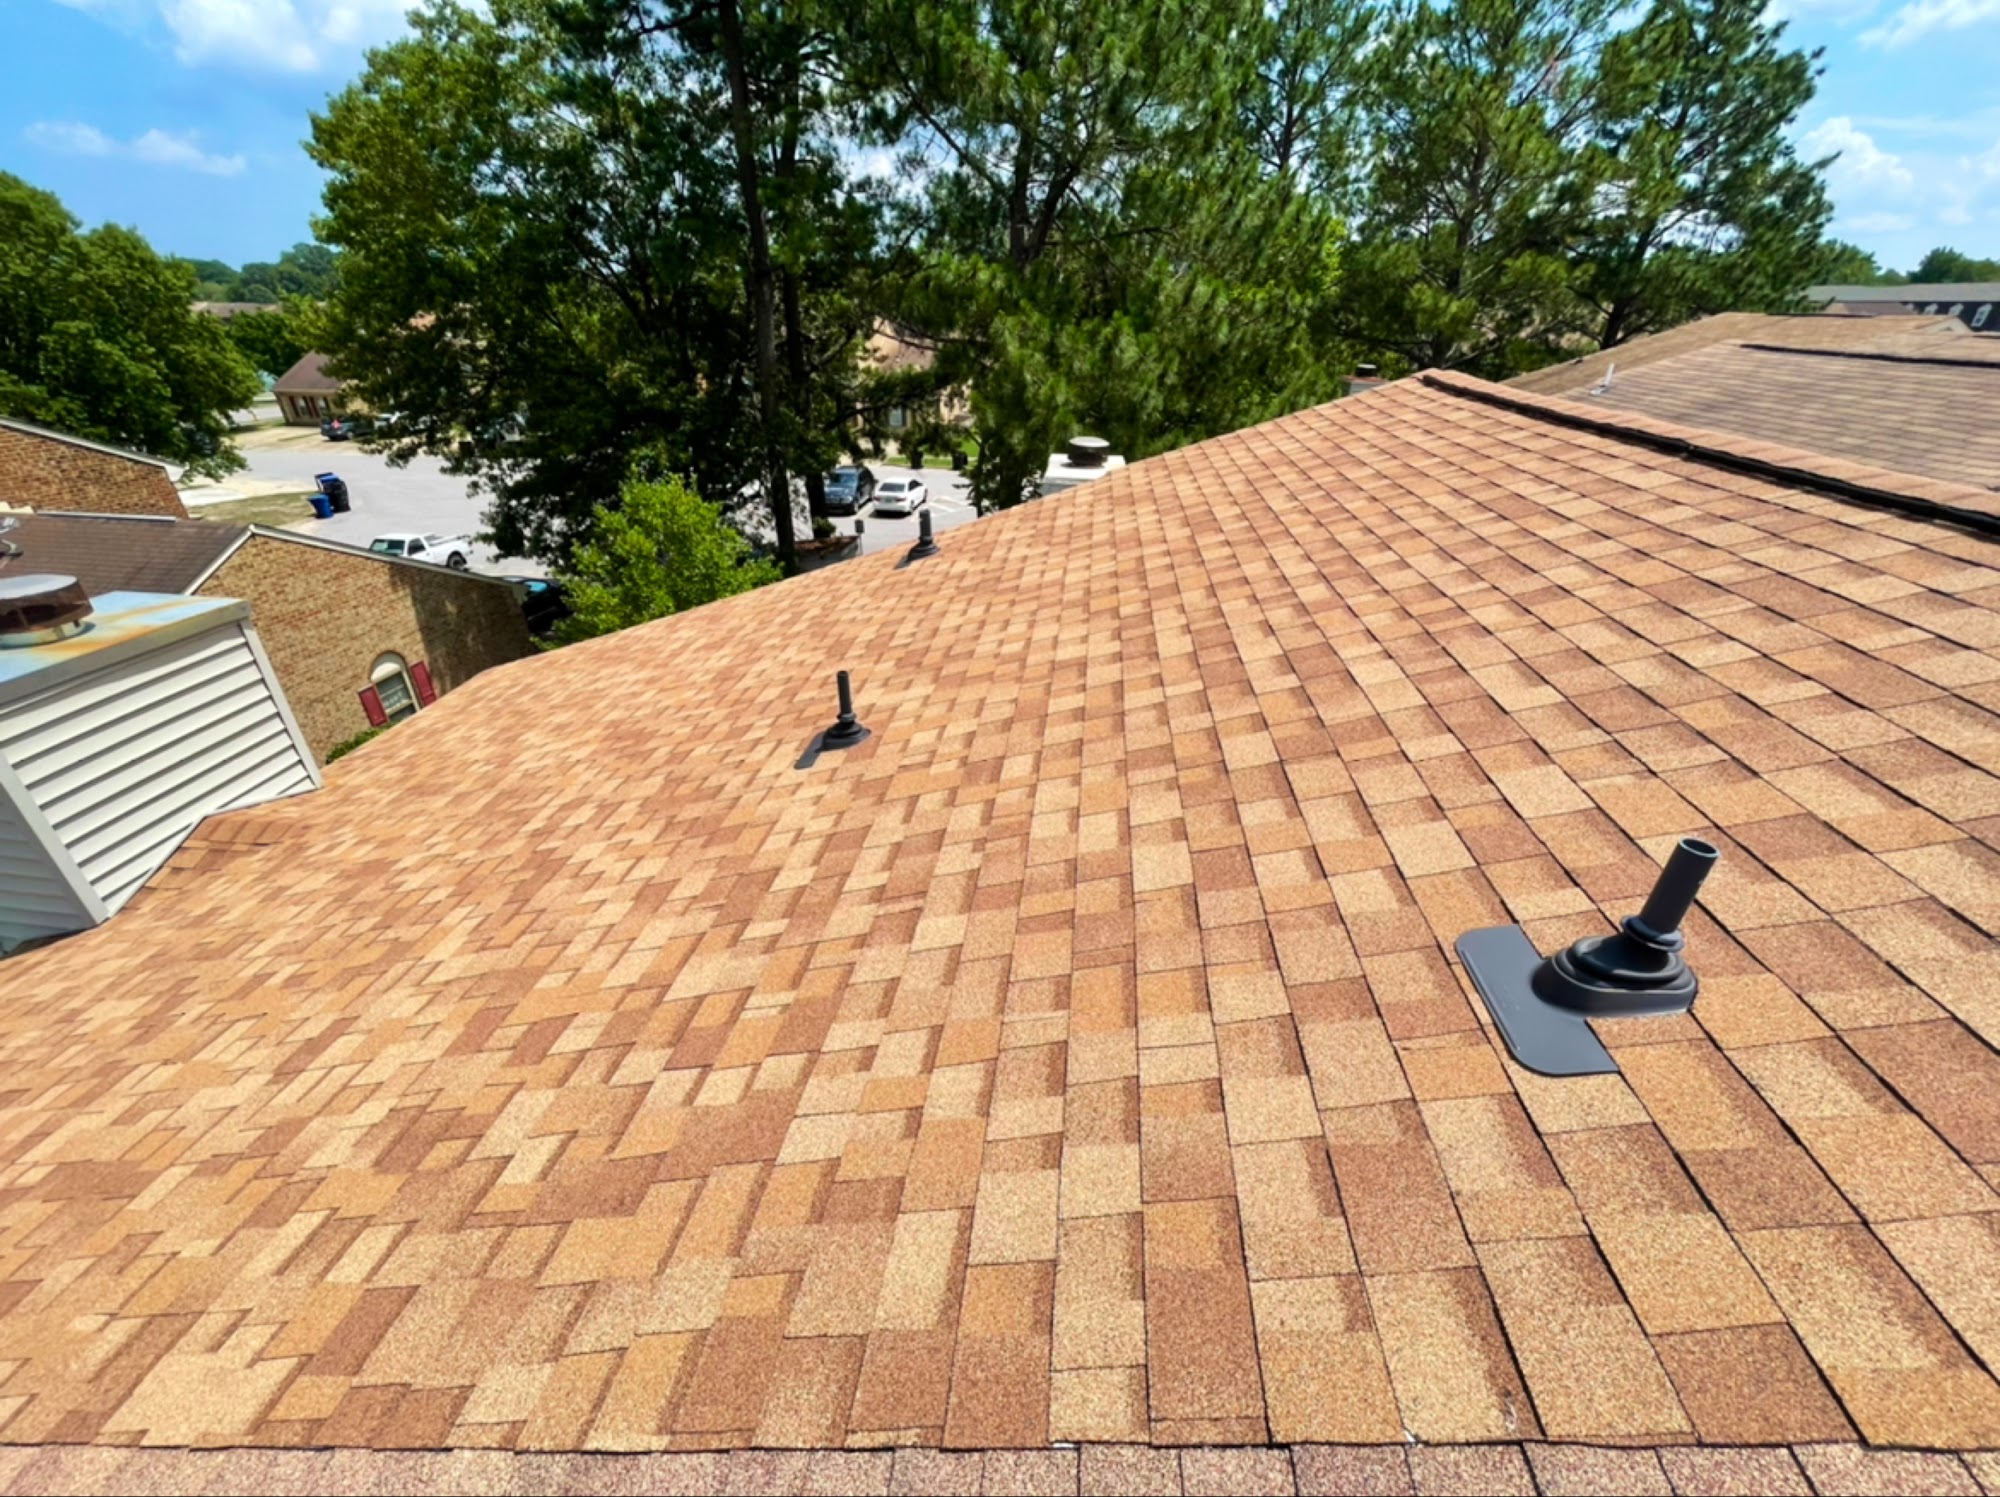 Reitzel Roofing and Exteriors